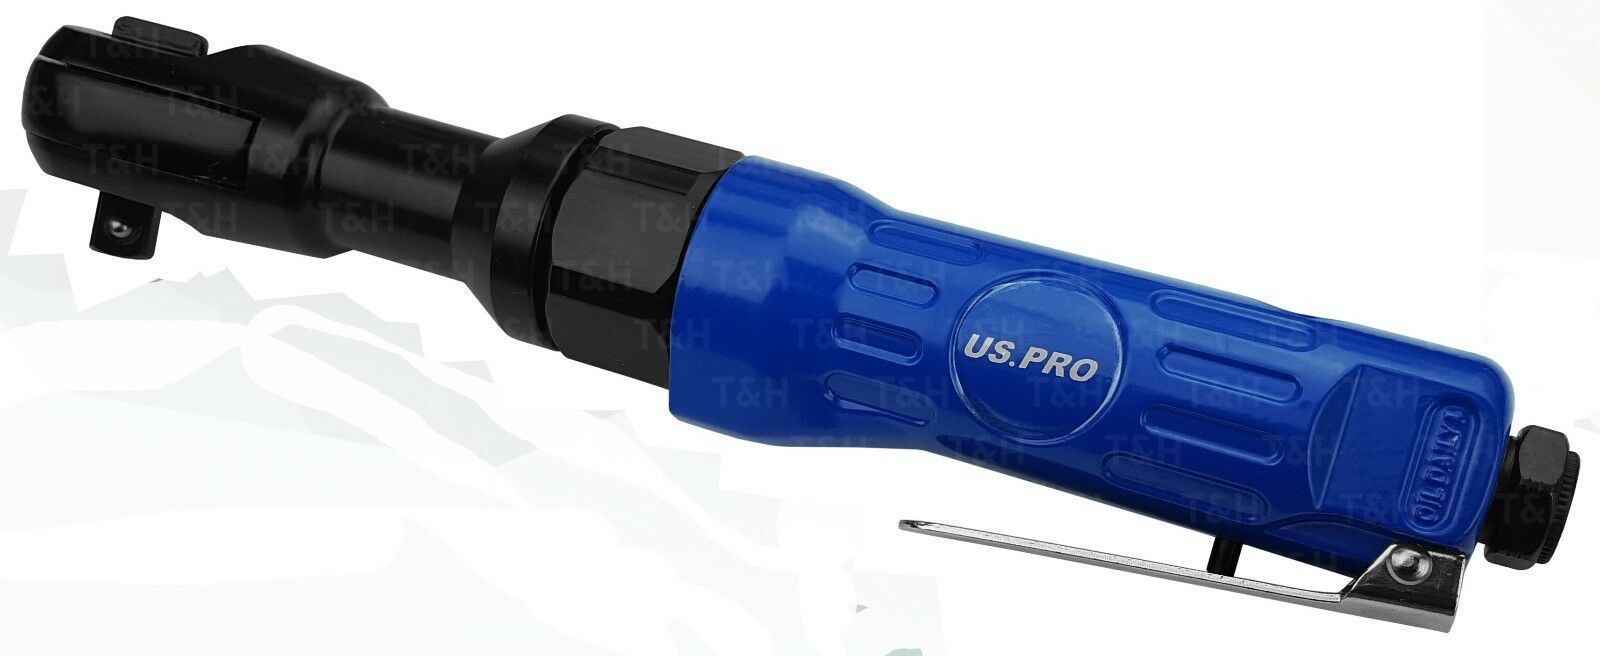 US PRO 3/8" DRIVE AIR IMPACT RATCHET WRENCH